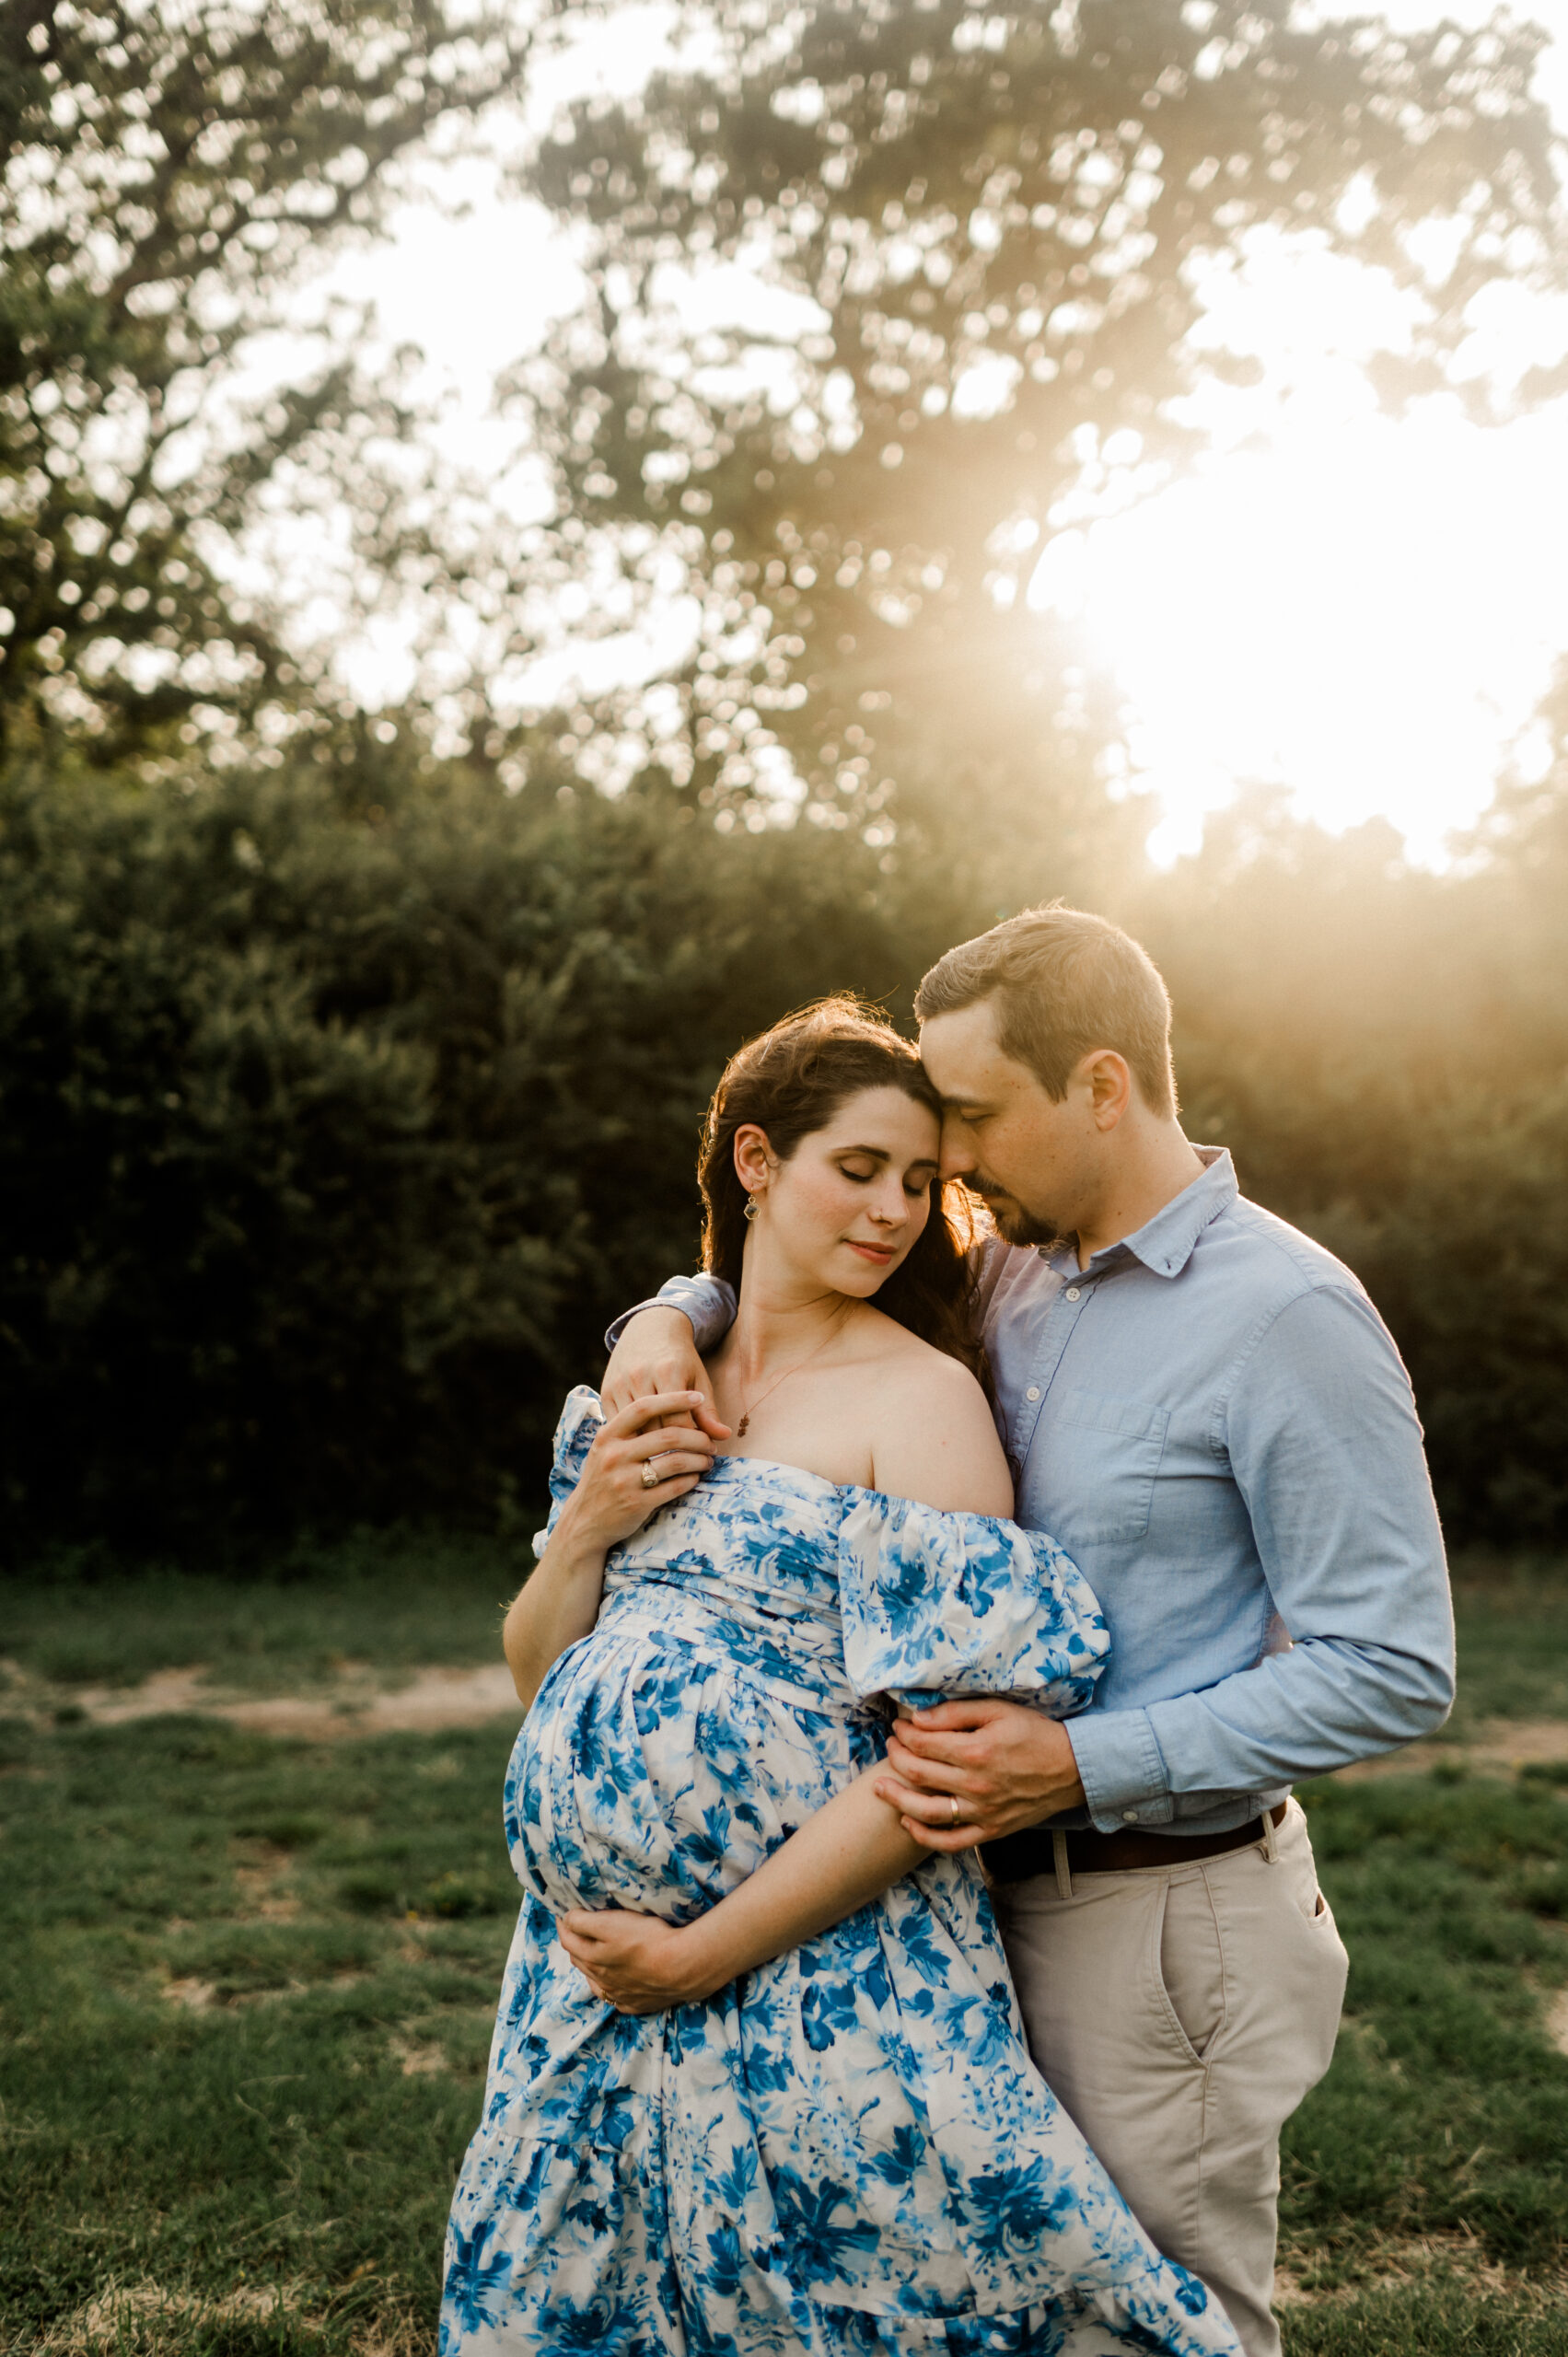 Sarah and Thomas' Maternity Session at Hensel Park in College Station, Texas with Rachel Driskell Photography | www.racheldriskell.com